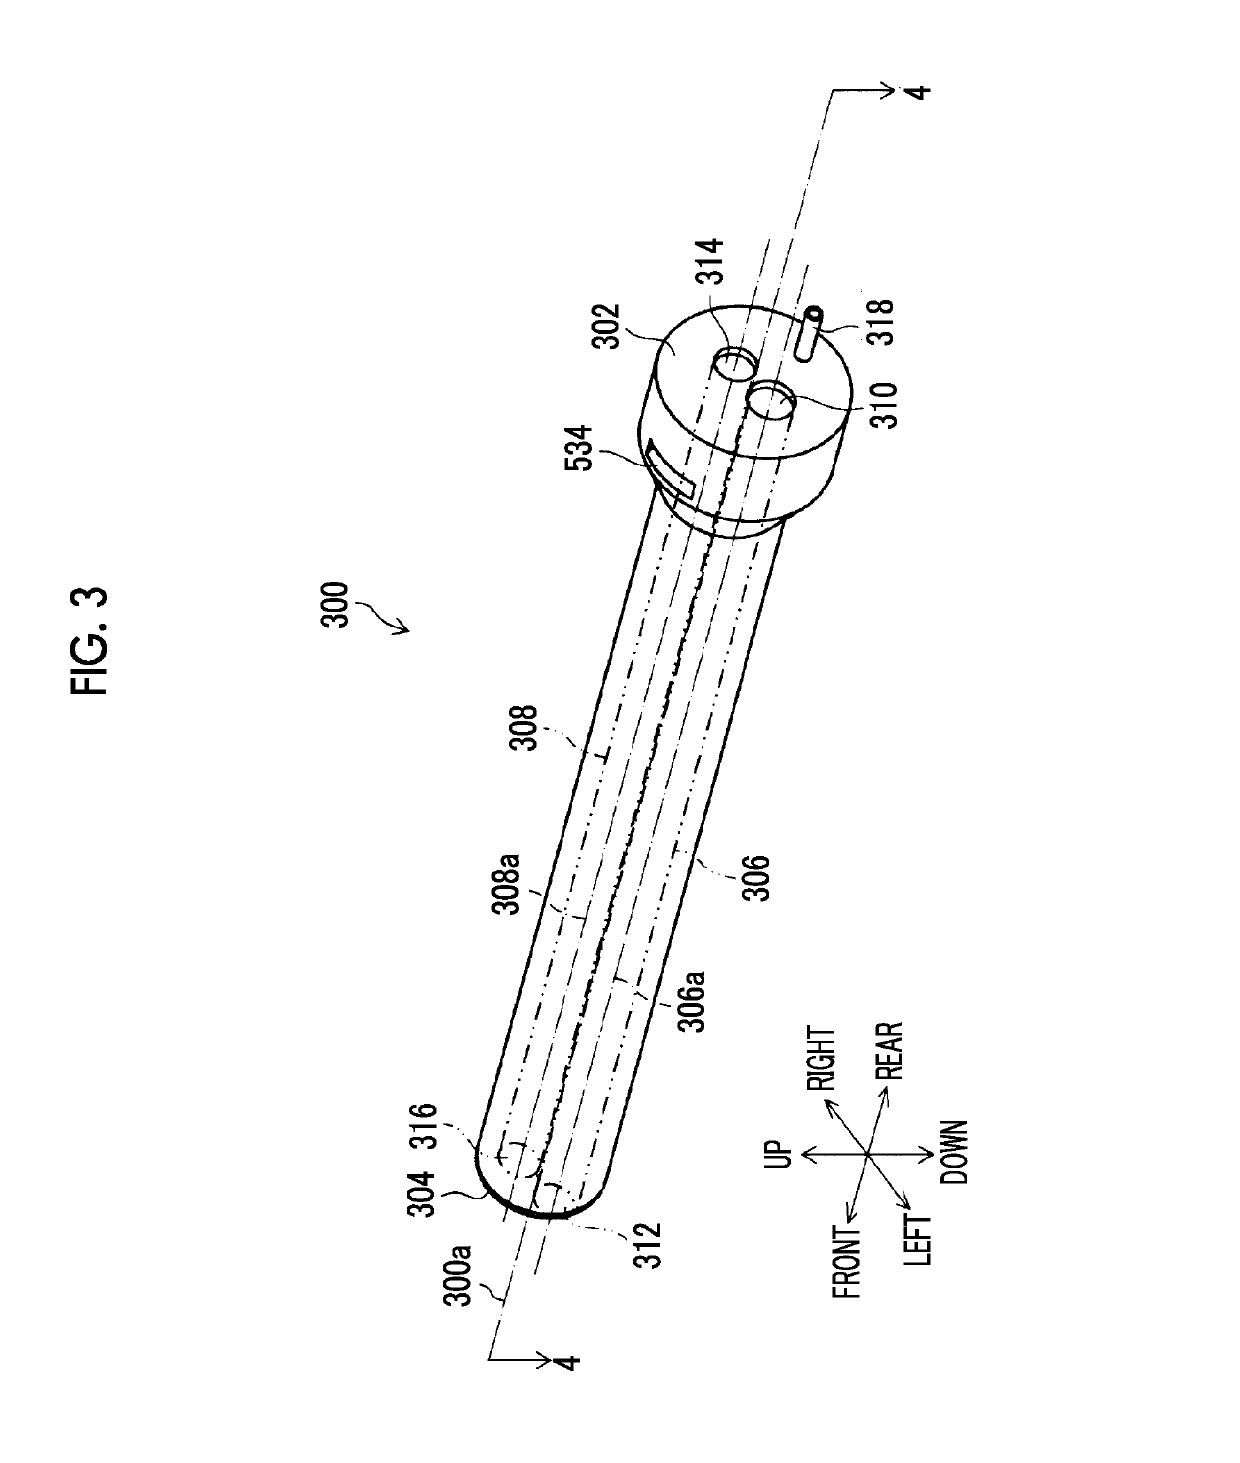 Endoscopic surgical device and overtube